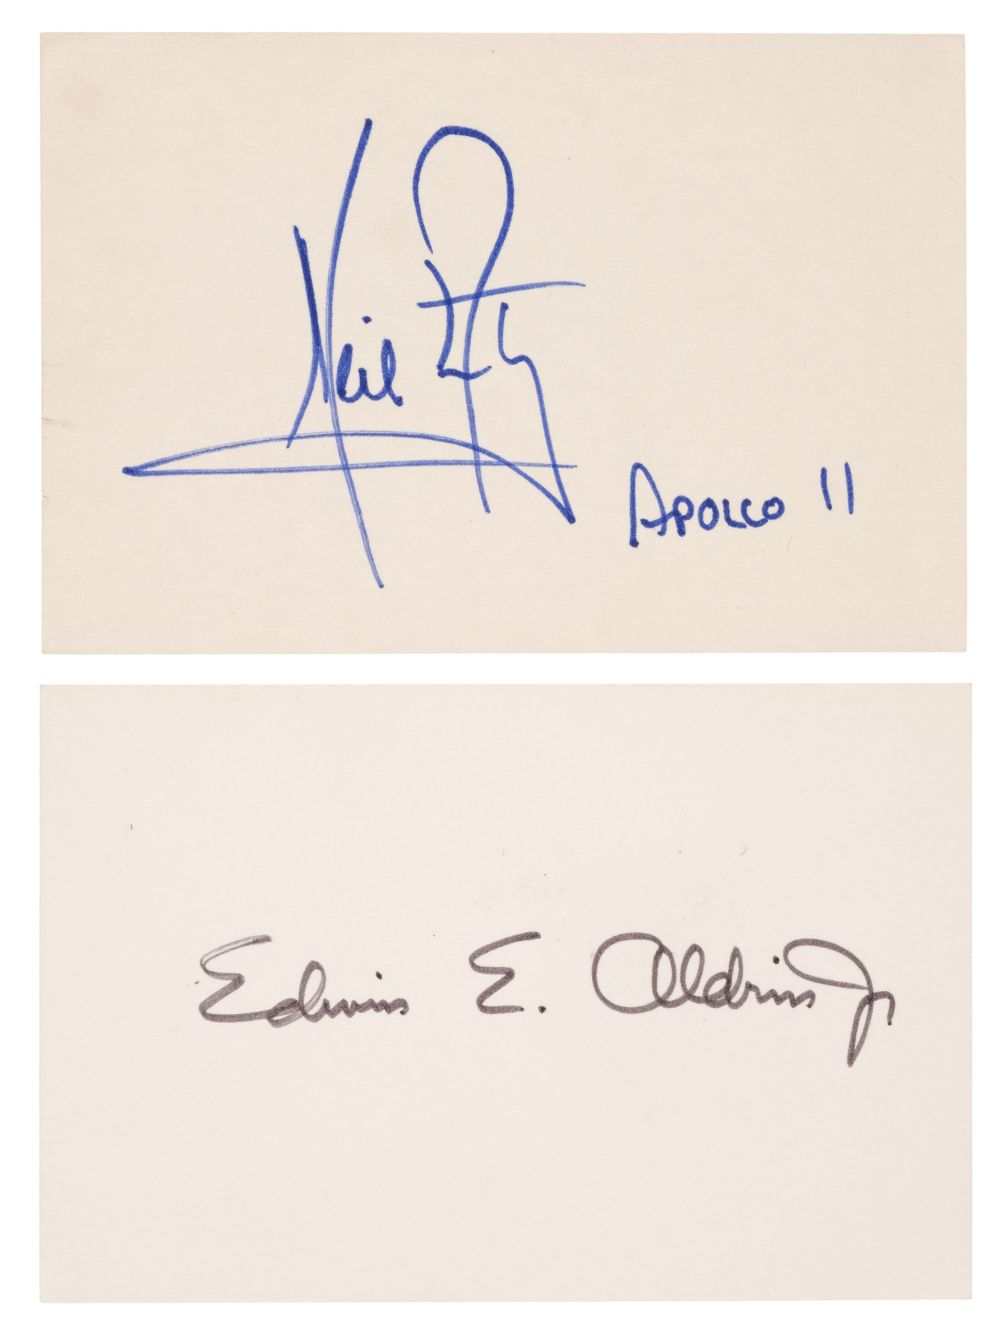 Armstrong (Neil, 1930-2012), Bold blue ink signature, 'Neil Amstrong APOLLO II', 1969